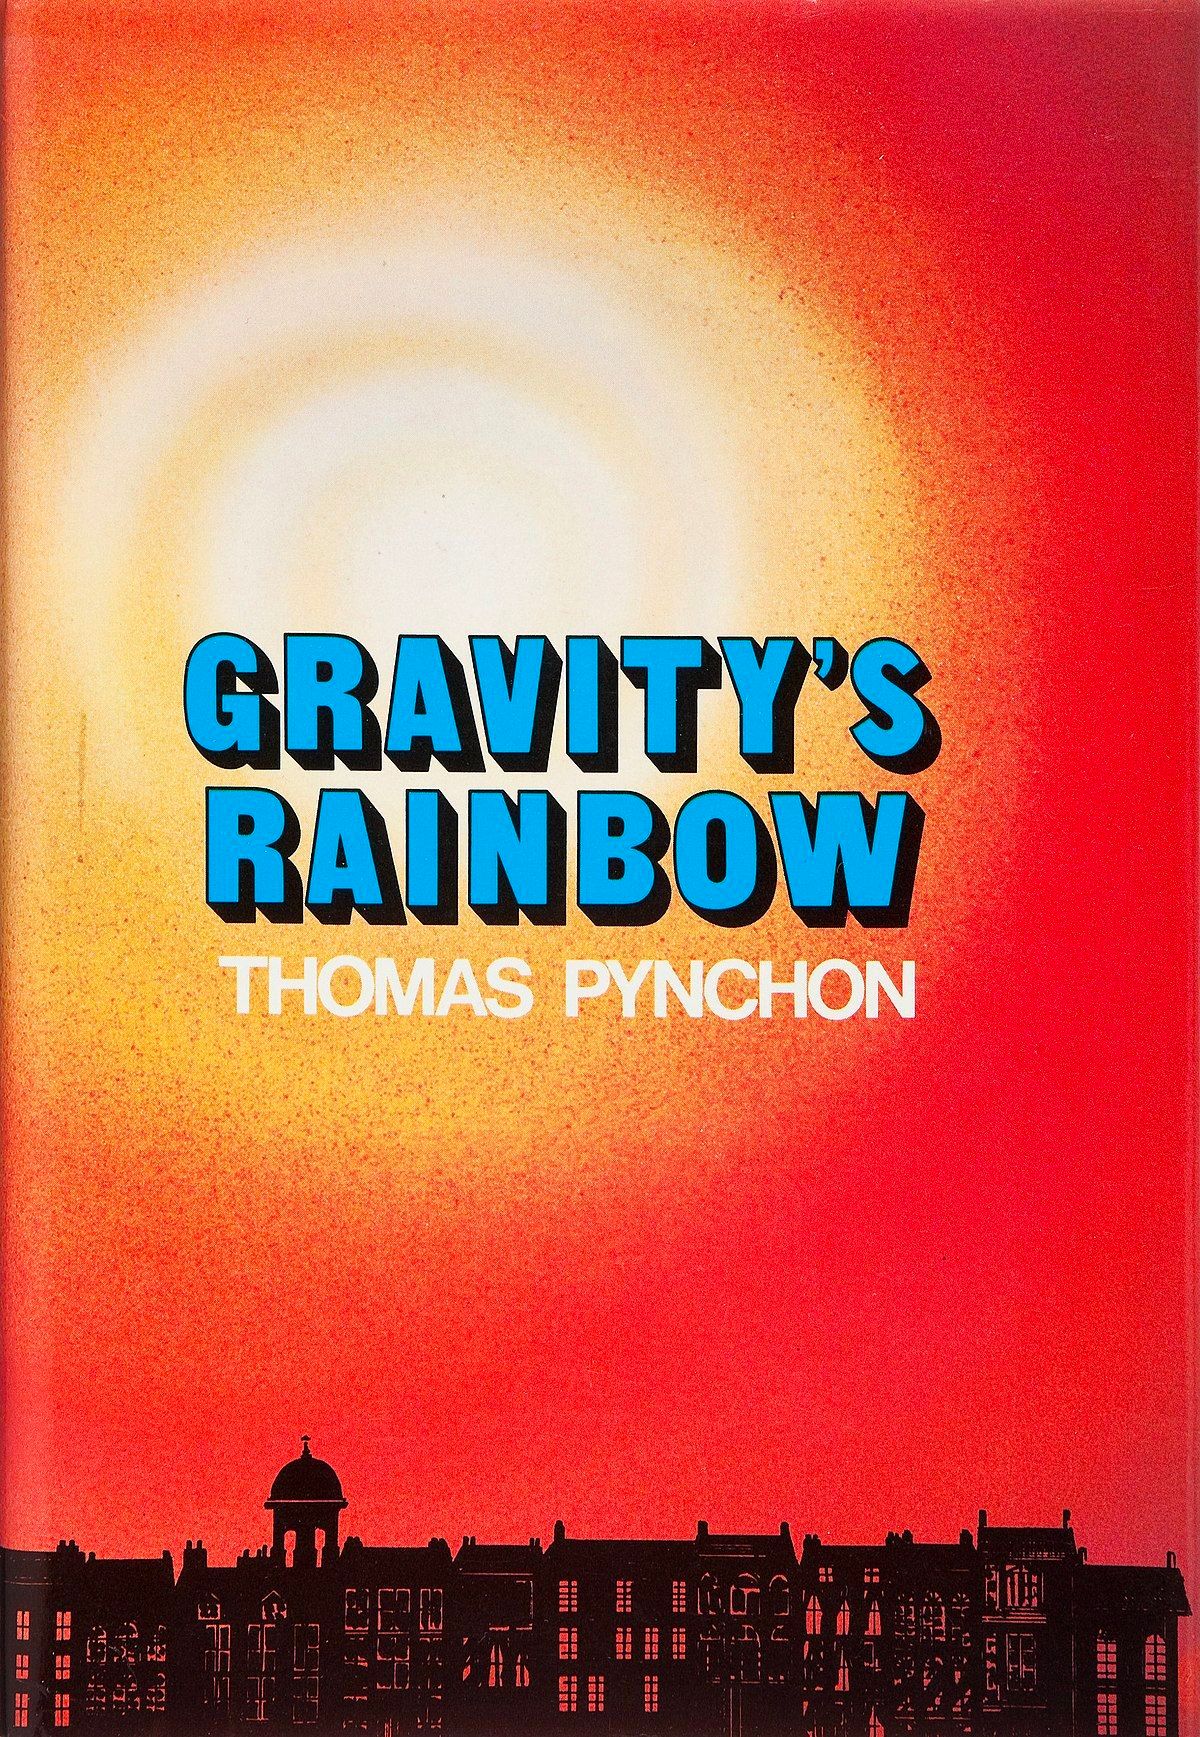 History Is Hard to Decode: On 50 Years of Thomas Pynchon’s “Gravity’s Rainbow”